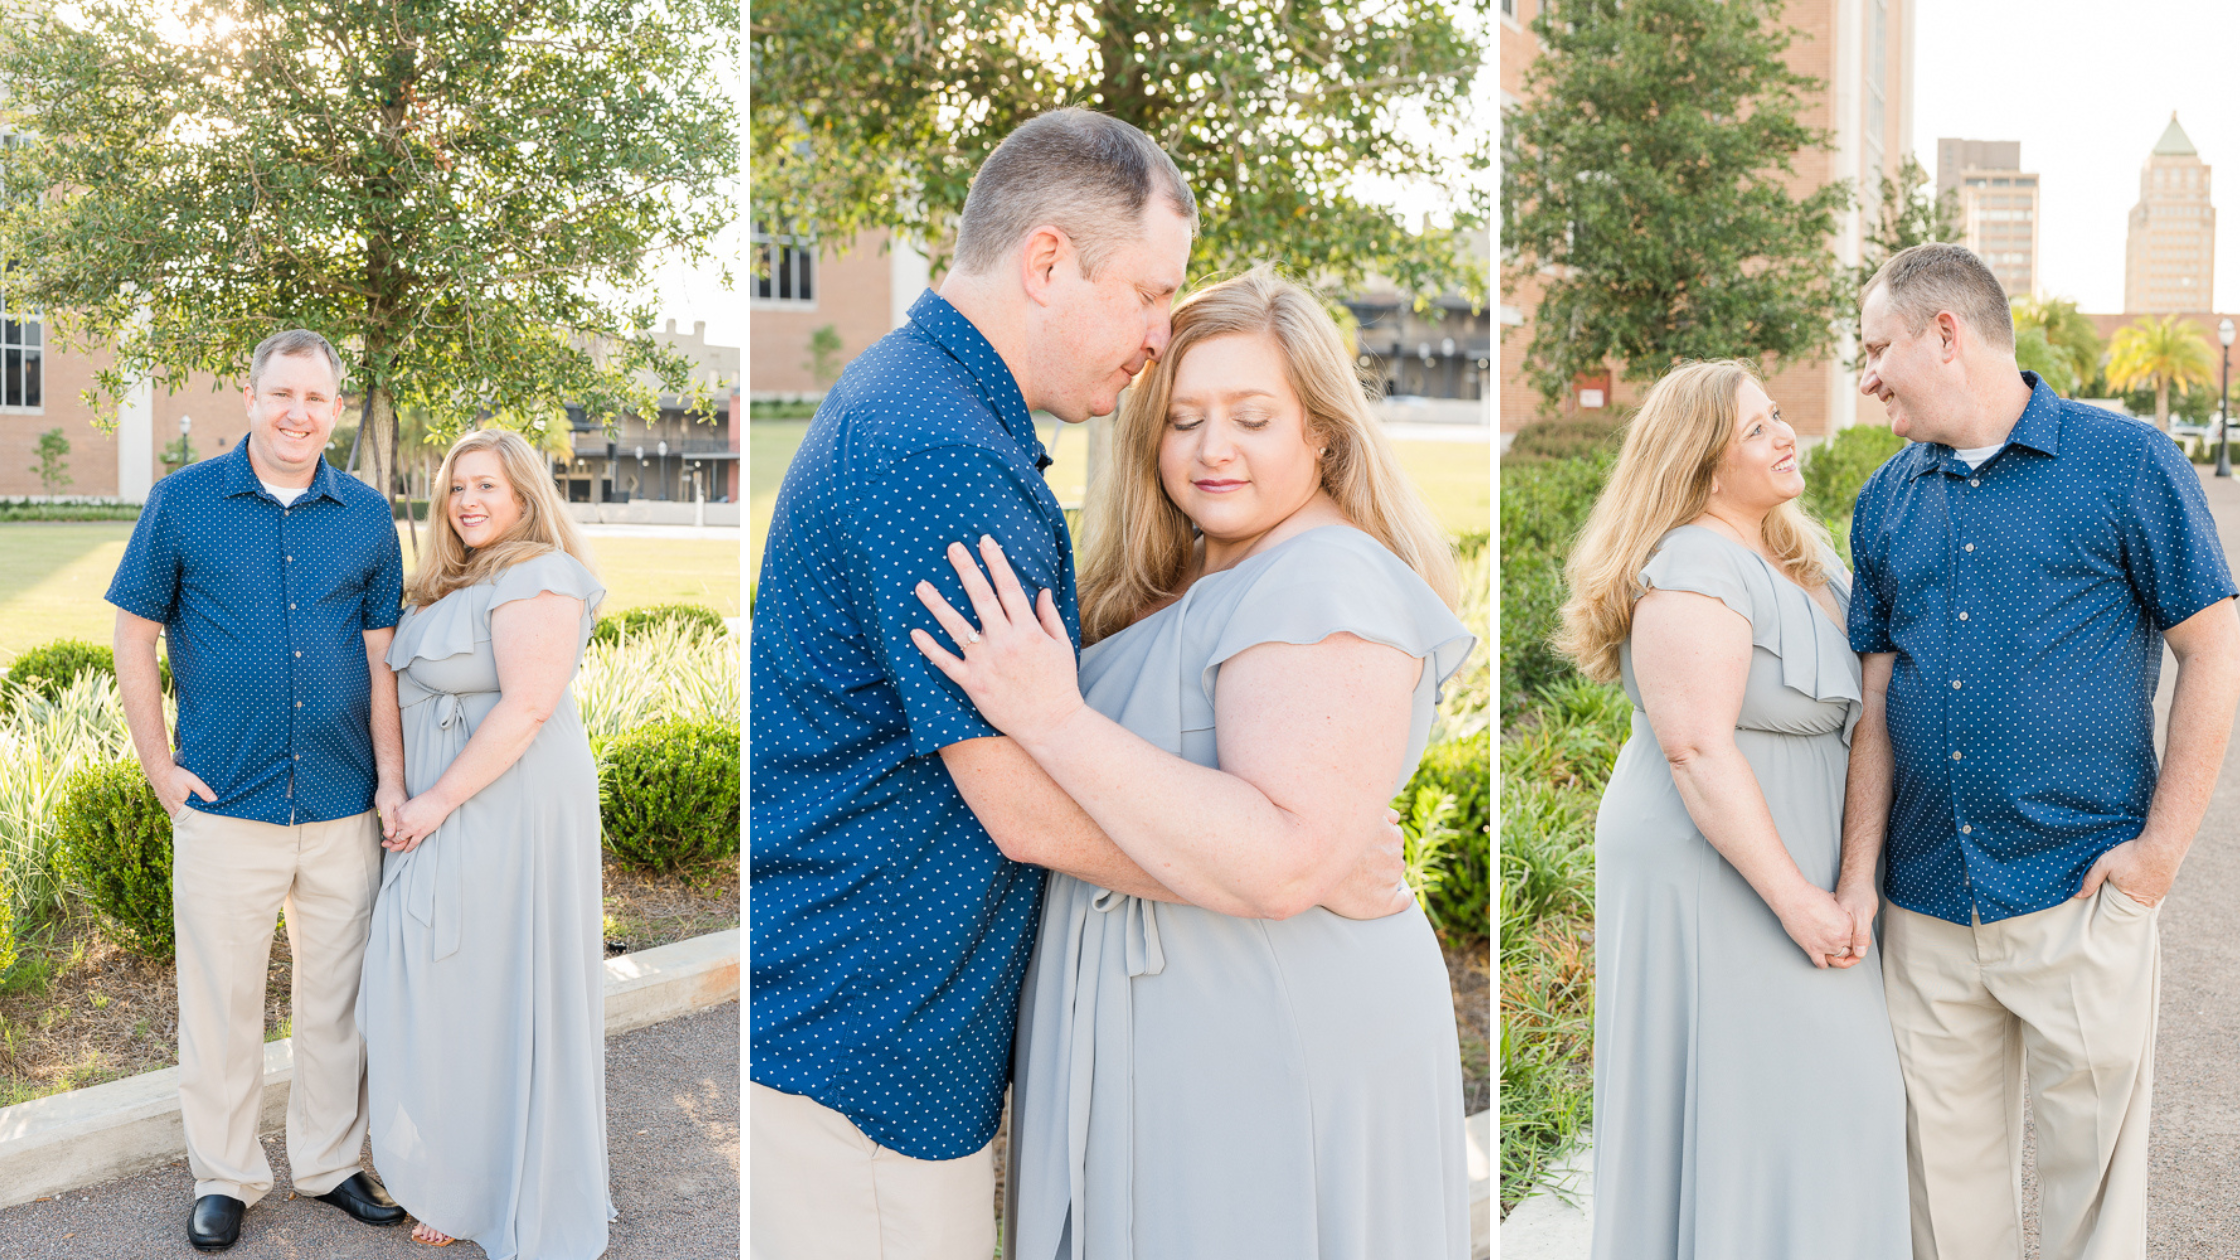 Downtown Mobile Engagement Session in the Summer with overcast skies photographed by Kristen Marcus Photography | Alabama Wedding Photographer